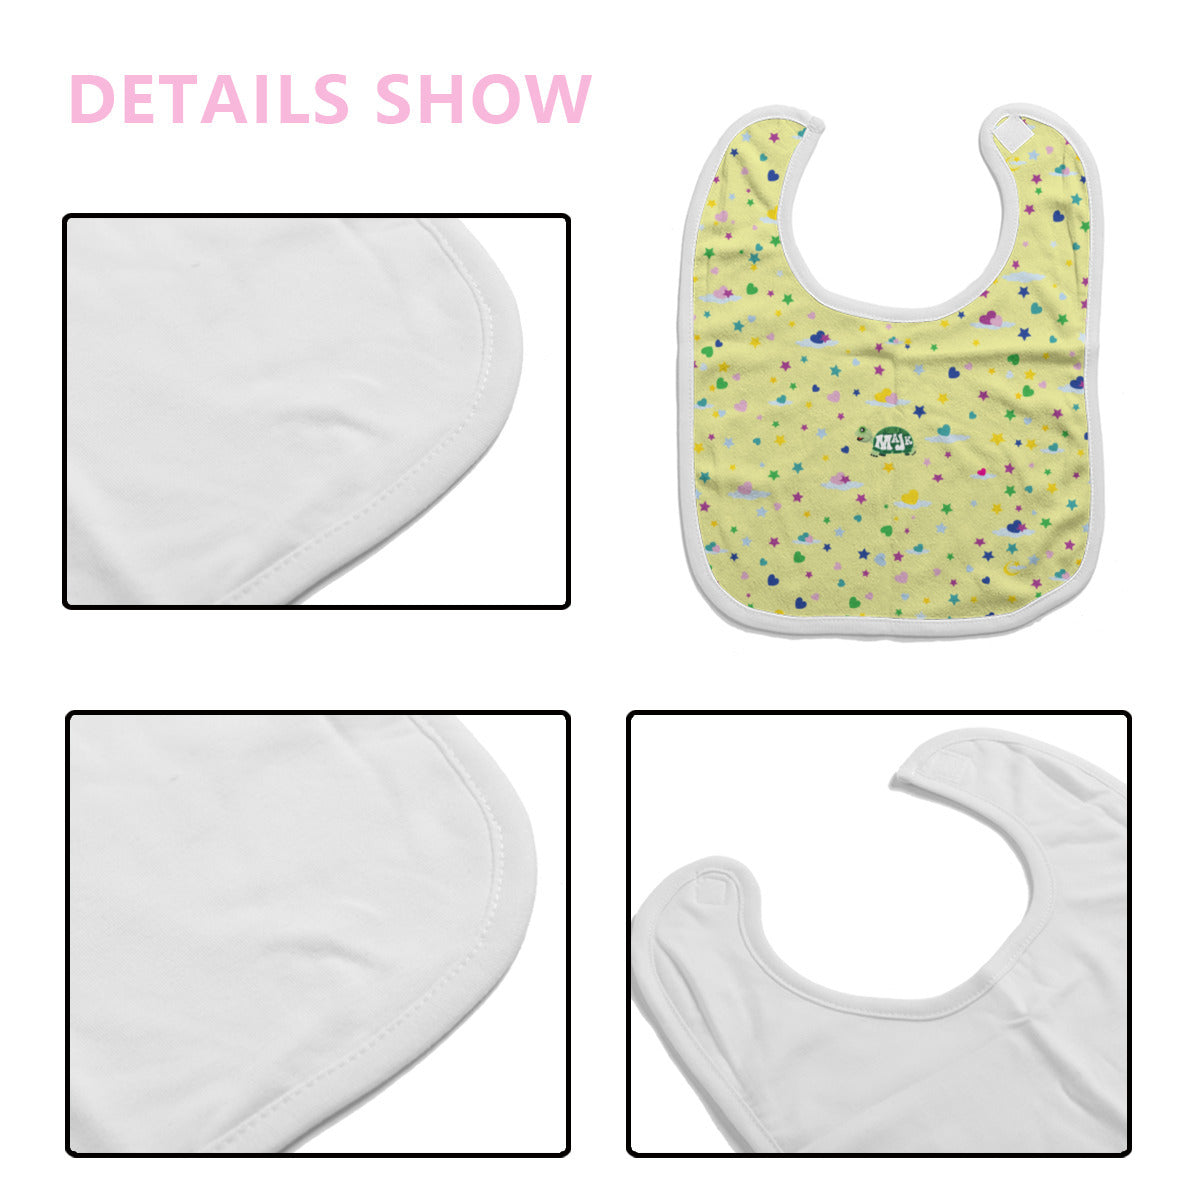 Cotton Baby Bib/Drooling Towel "Sweet Dreams Little One" (Yellow)